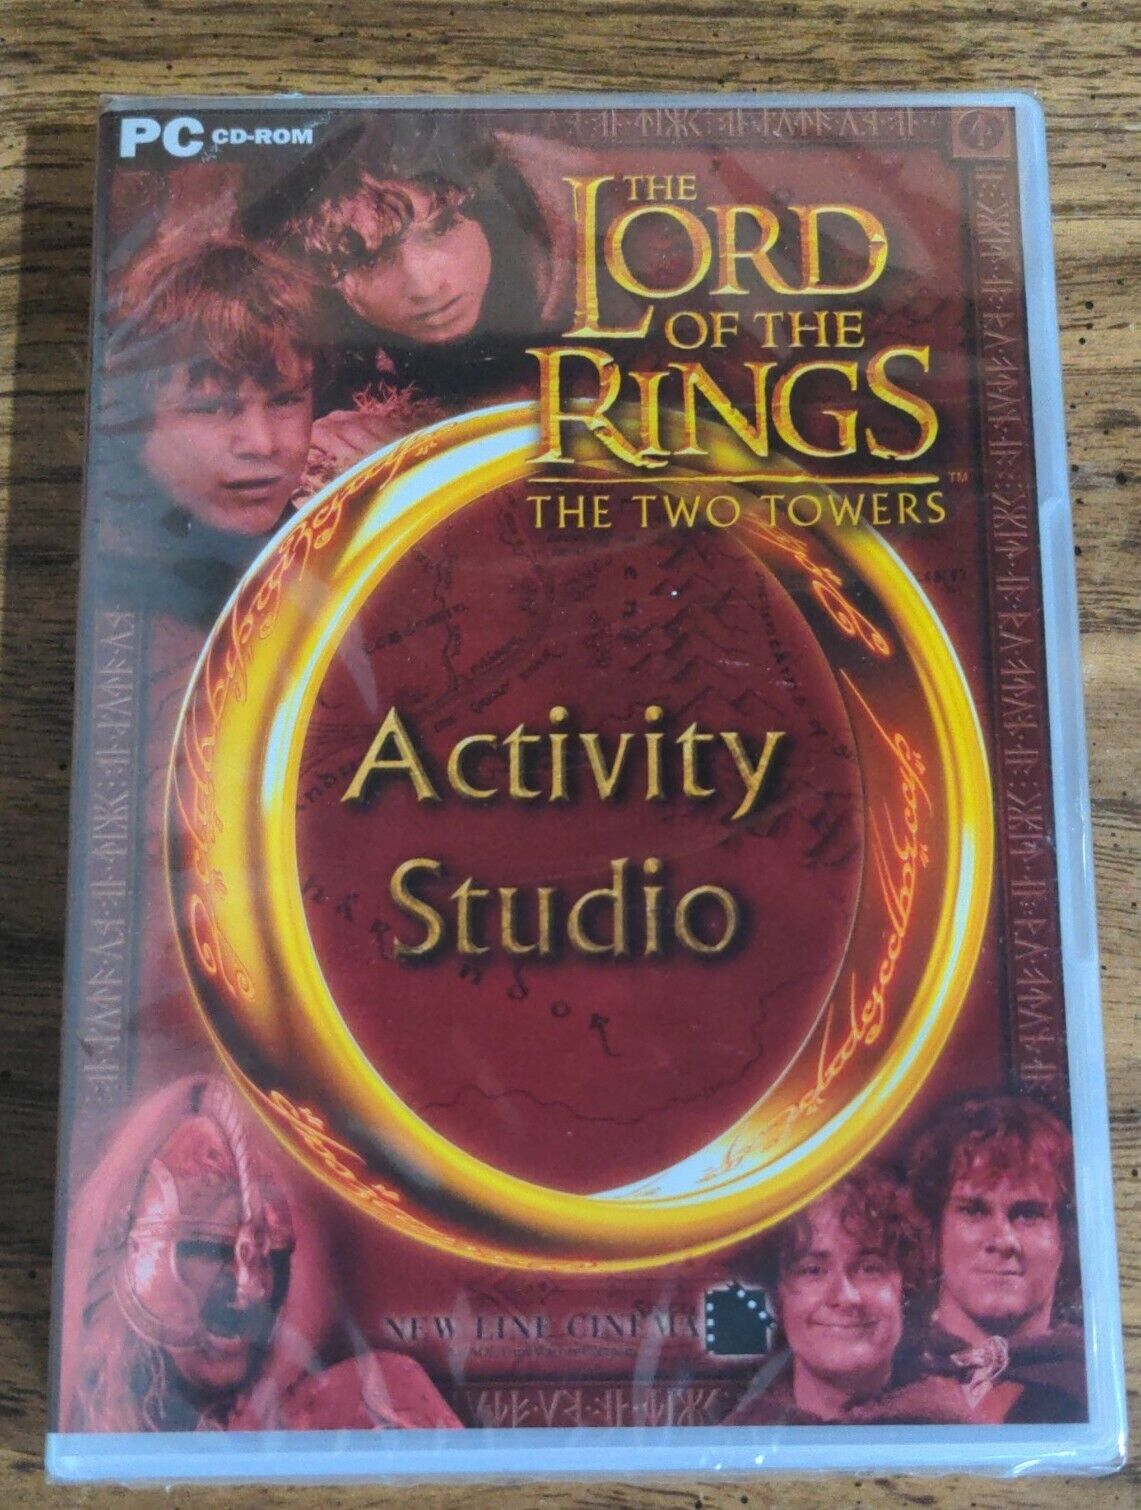 The Lord Of The Rings The Two Towers Activity Studio for PC Rare Collectible 